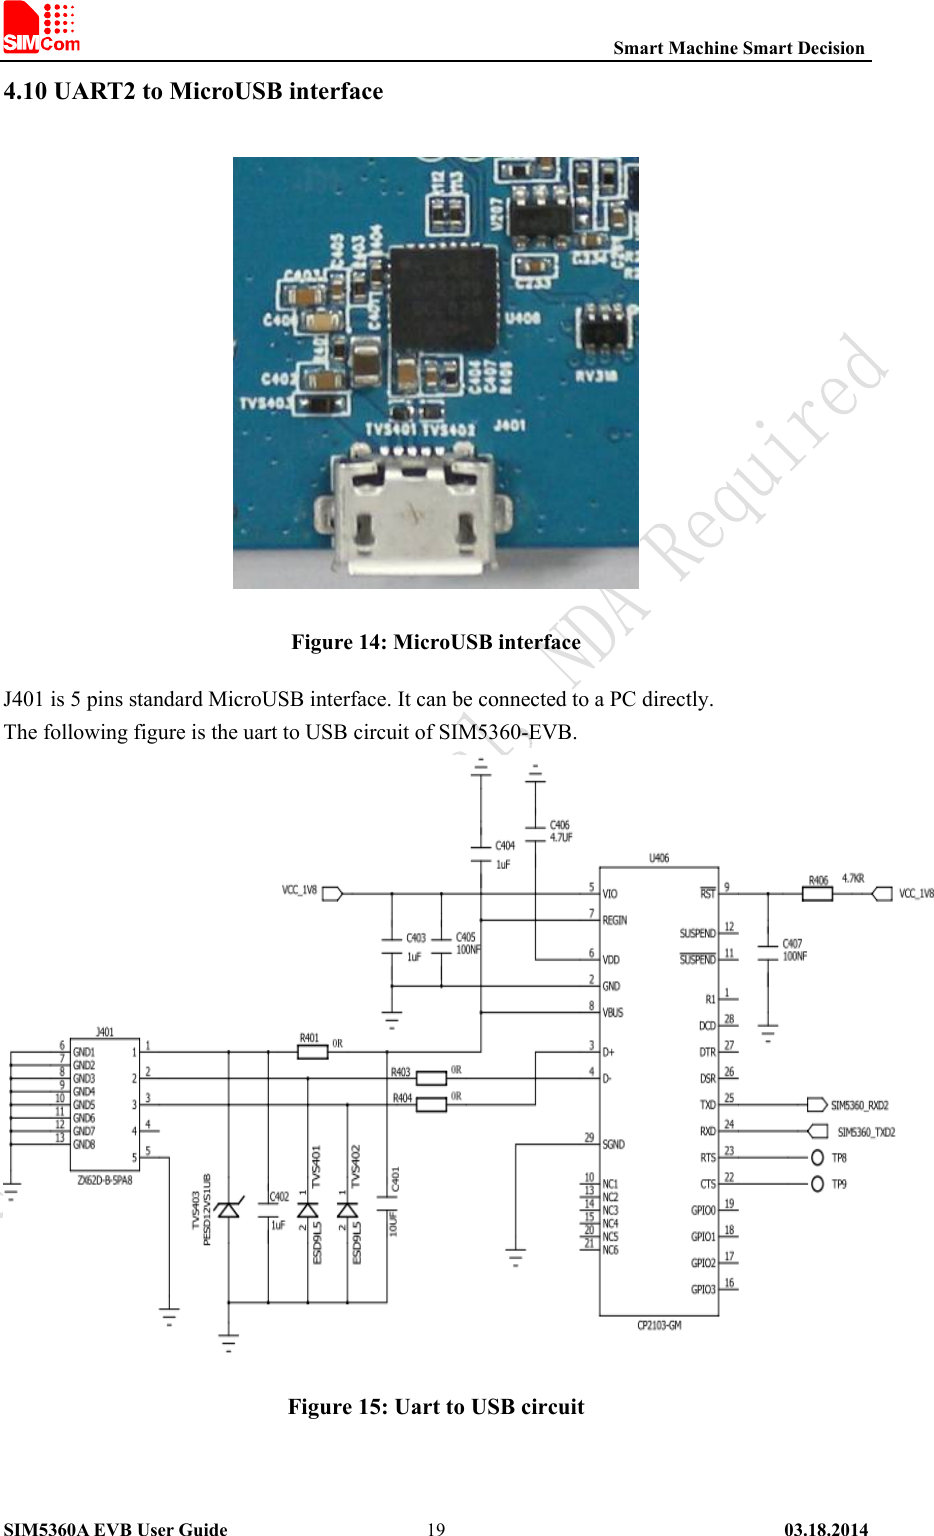                                                          Smart Machine Smart Decision SIM5360A EVB User Guide   03.18.2014   194.10 UART2 to MicroUSB interface  Figure 14: MicroUSB interface J401 is 5 pins standard MicroUSB interface. It can be connected to a PC directly. The following figure is the uart to USB circuit of SIM5360-EVB.  Figure 15: Uart to USB circuit 